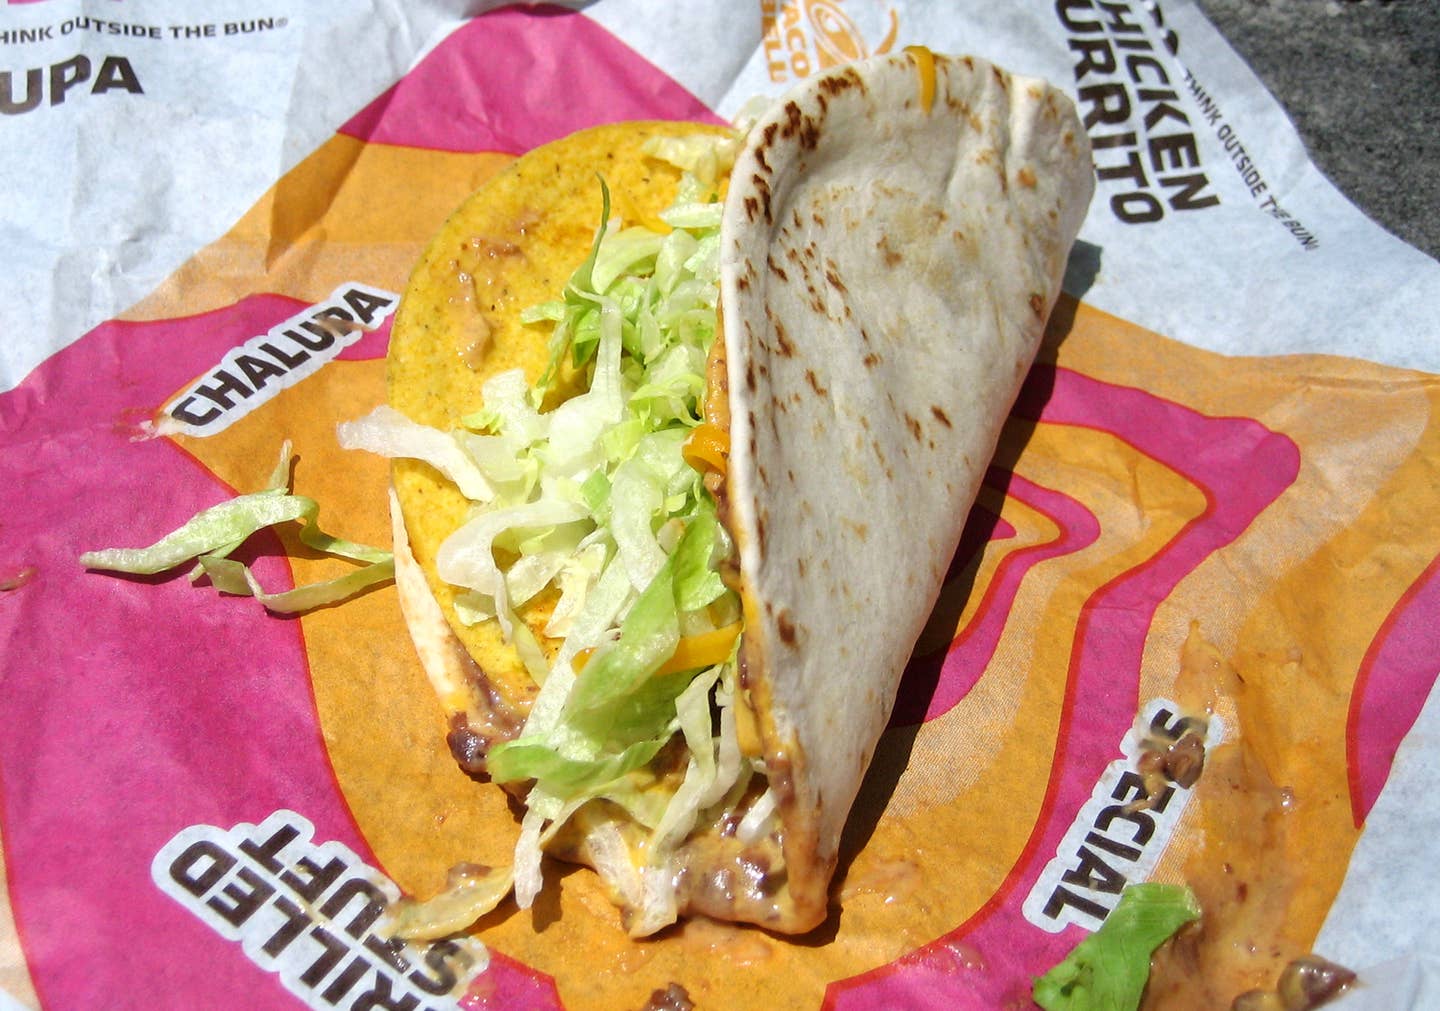 Weekend Reading: Taco Bell, The End of Avocados, Eating Acorns, and More